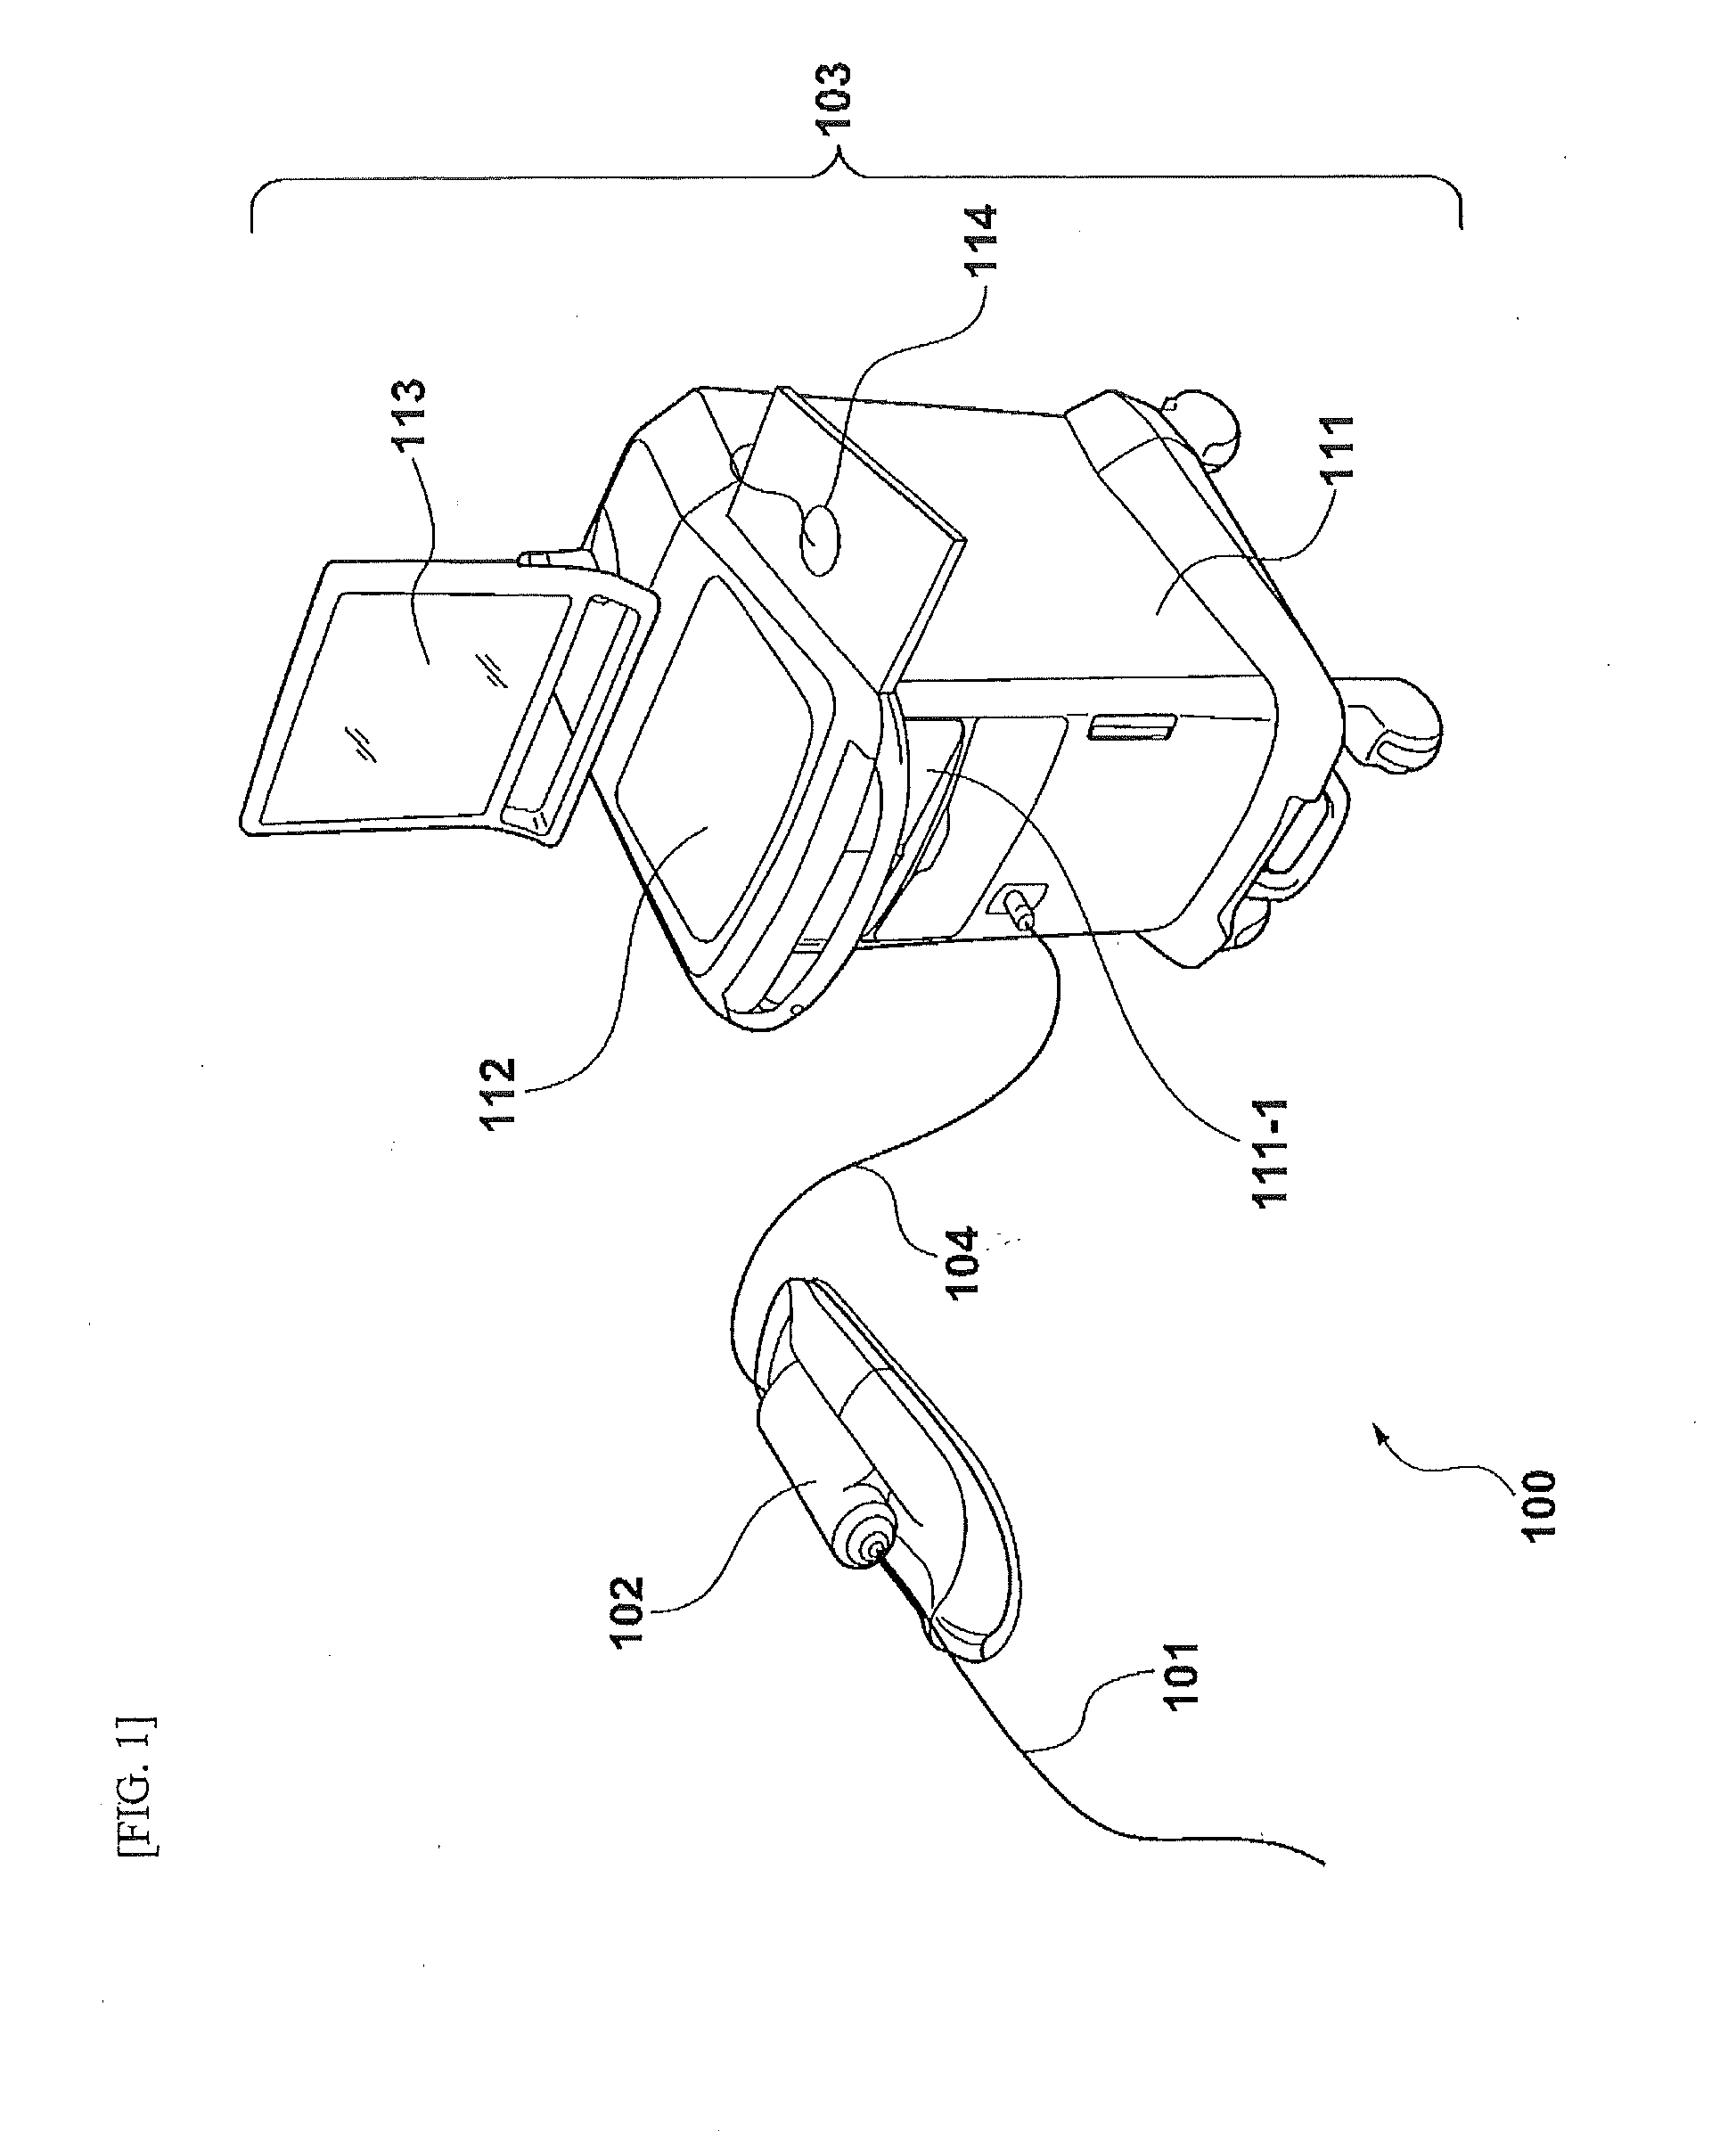 Imaging apparatus for diagnosis, information processing apparatus, control method thereof, program and computer-readable storage medium